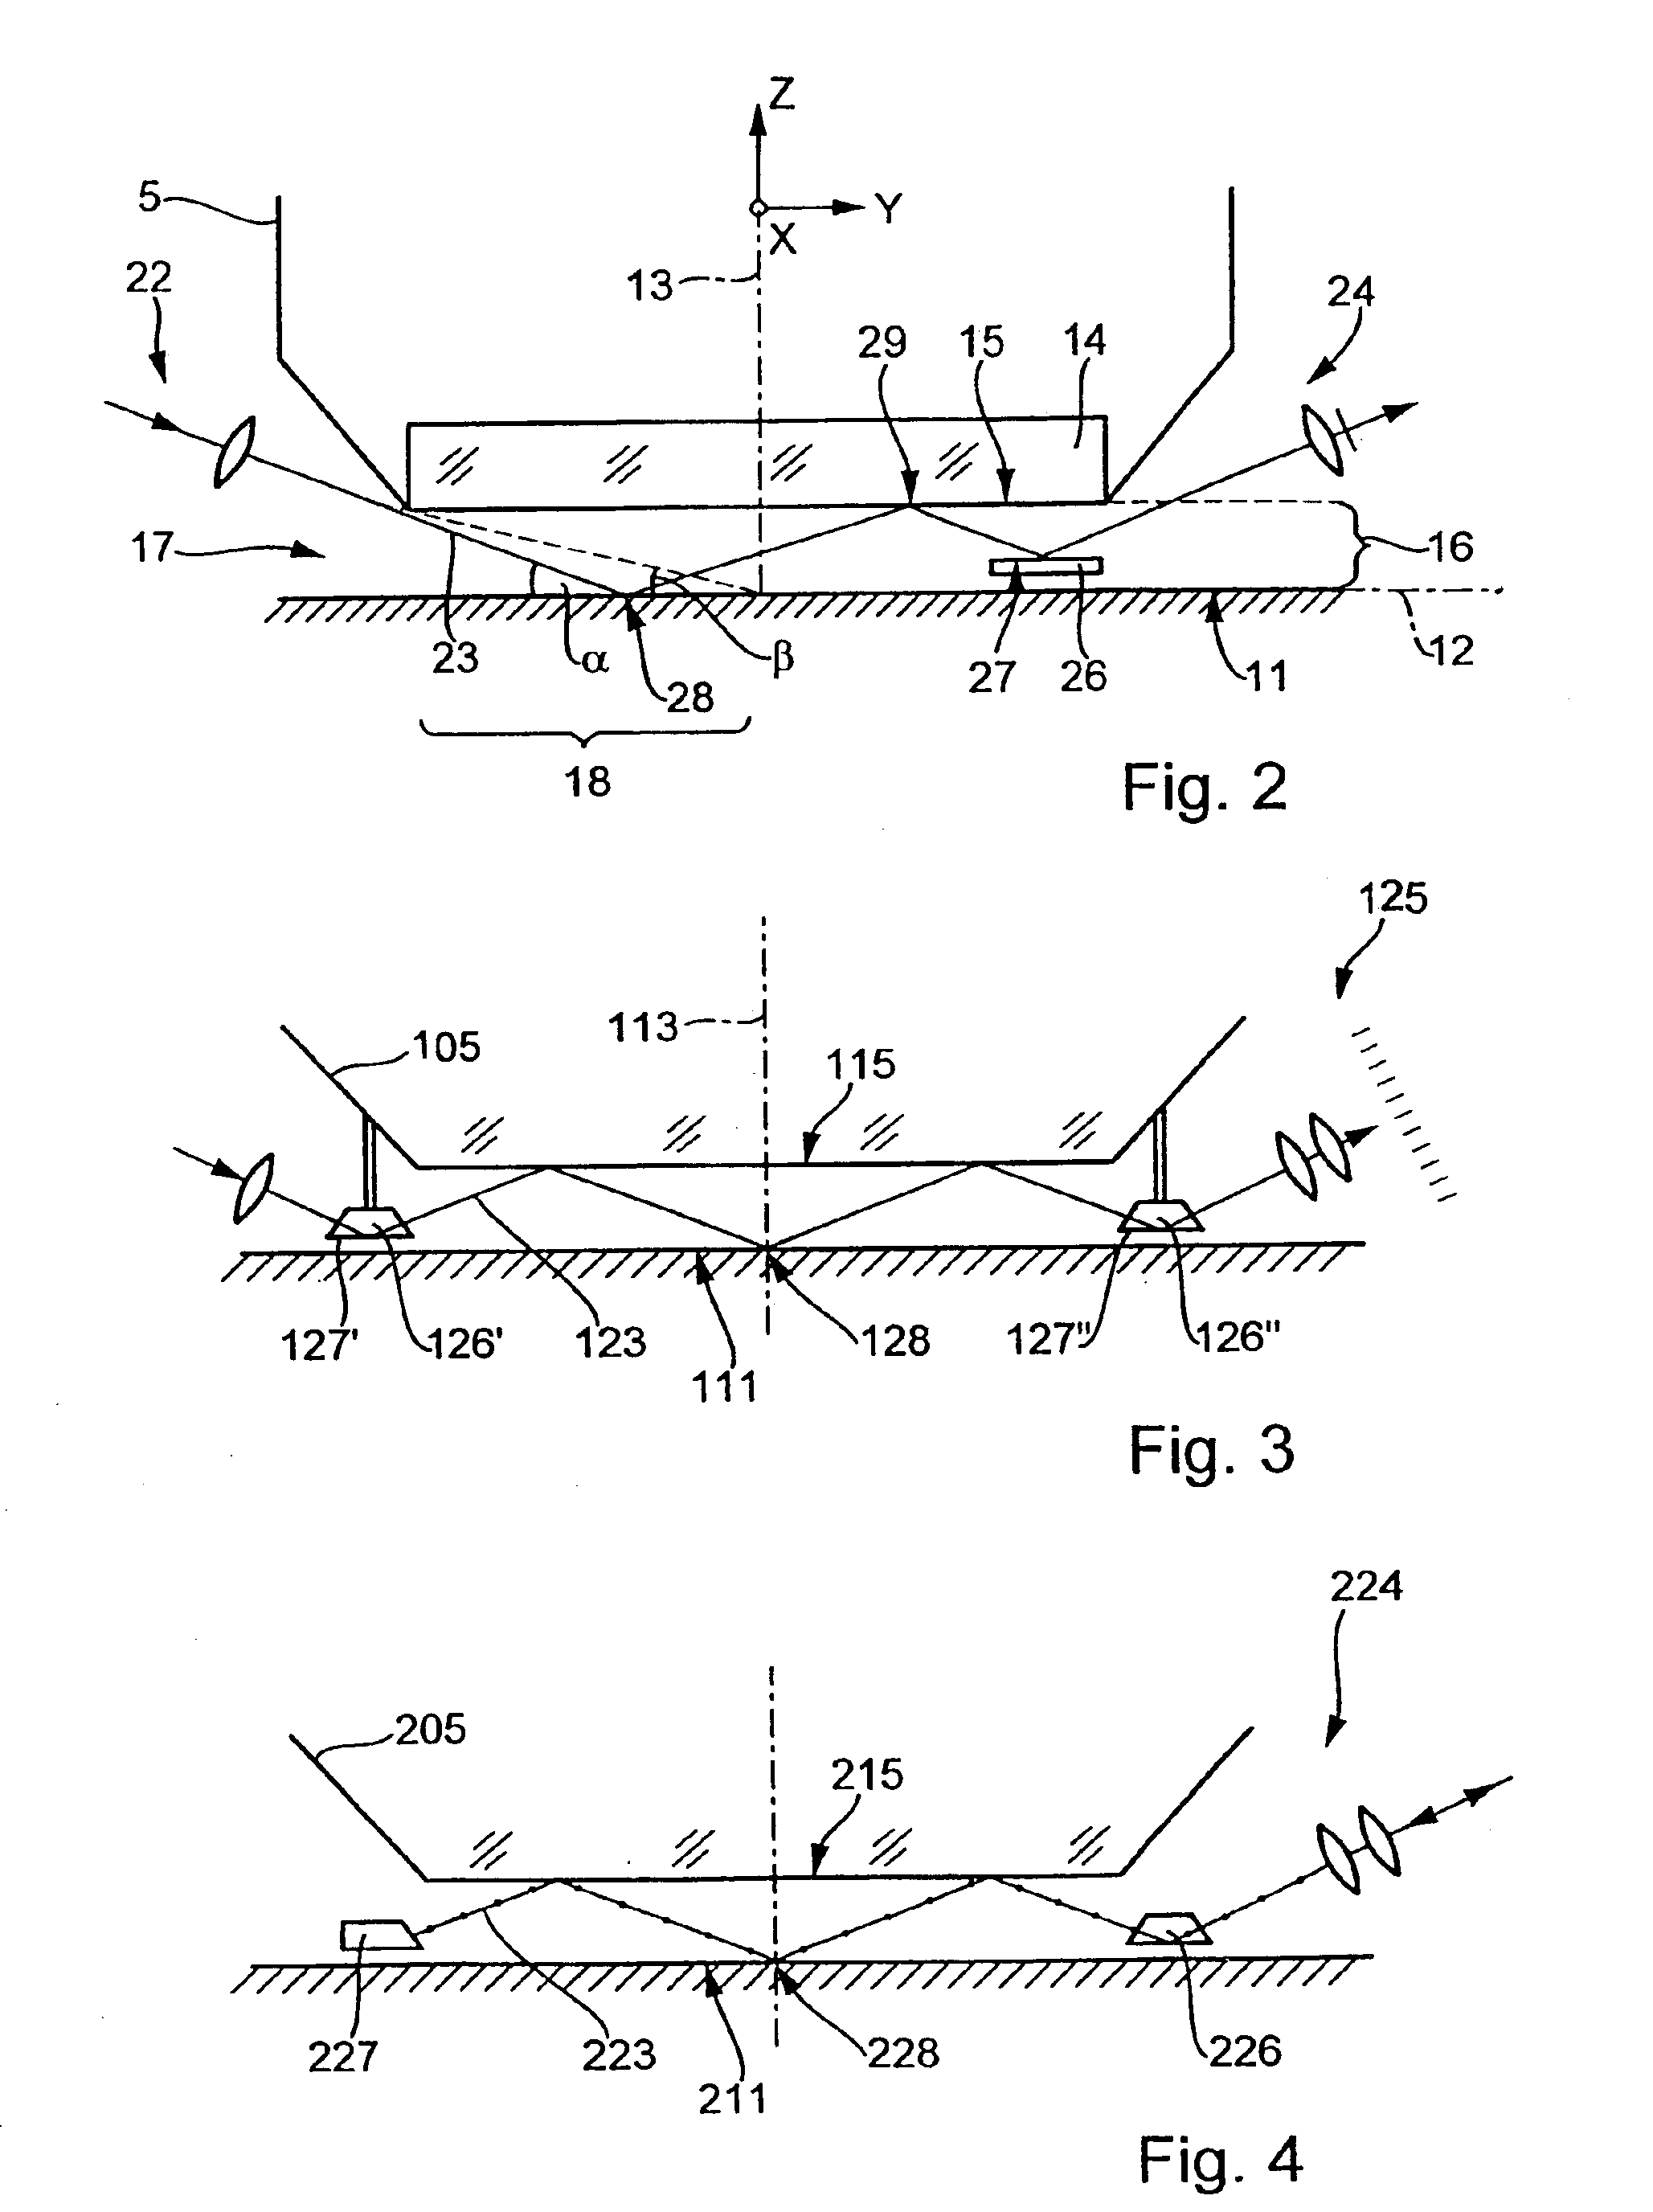 Method for focus detection for optically detecting deviation of the image plane of a projection lens from the upper surface of a substrate, and an imaging system with a focus-detection system